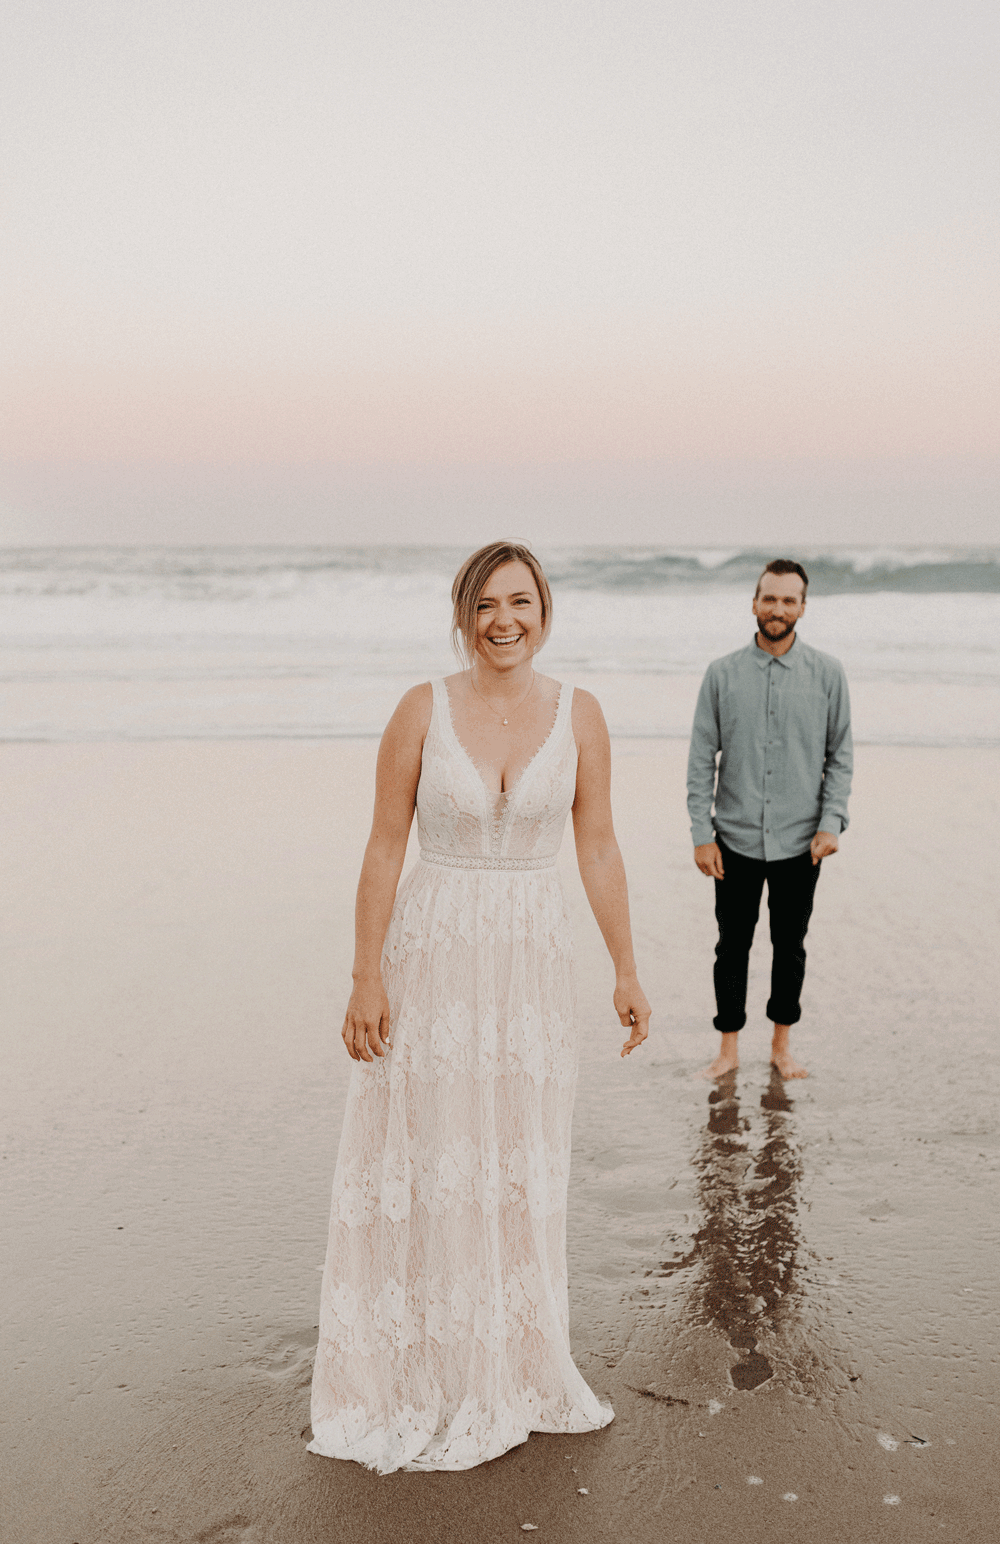 moving GIF of a Bride & Groom having fun on the beach